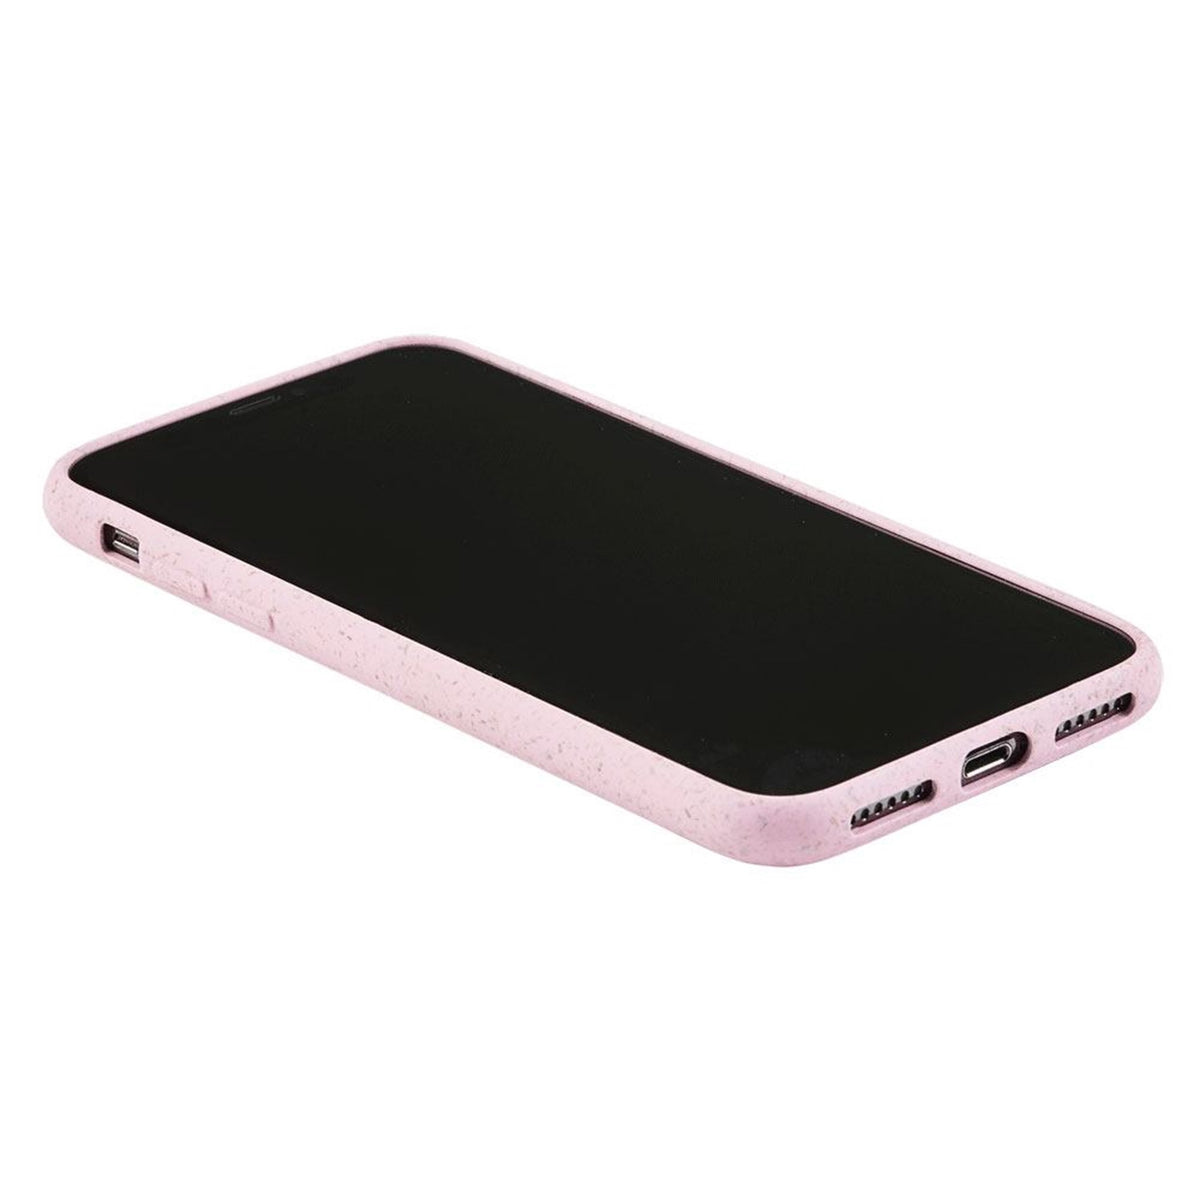 GreyLime-iPhone-X-XS-biodegradable-cover-Pink-COIPXXS05-V3.jpg